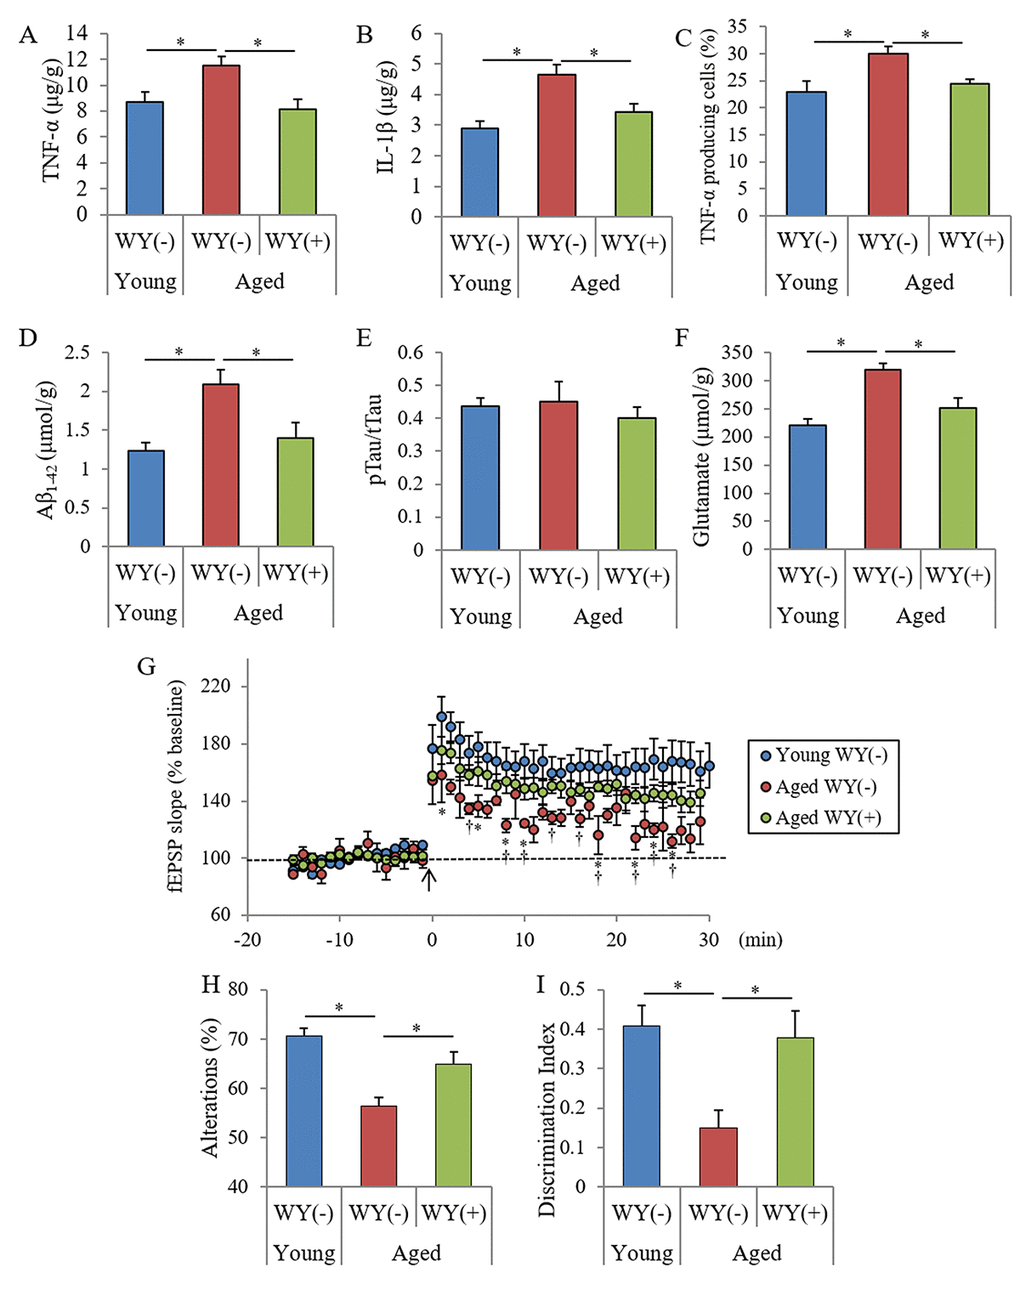 Effects of WY peptides on cognitive decline in aged mice. Seven and 68-week-old male C57BL/6J mice were maintained on a diet with or without 0.05% (w/w) WY peptide for 19 weeks. (A, B) The levels of TNF-α and IL-1β in the hippocampus. (C) Characterization of CD11b-positive microglia in the brain isolated by MACS and flow cytometry. The percentages of TNF-α-producing cells to CD11b-positive cells. (D-F) The levels of TBS-soluble Aβ1-42, pTau (pS199)/total Tau, and glutamate in the hippocampus. (G) LTP measurement from a hippocampus slice after theta-burst stimulation (arrow). (H) Spontaneous alterations during 8 min of exploring in Y-maze. (I) Discrimination index in NORT by measuring the time spent exploring novel and familiar objects during 5 min of re-exploration. Data are the mean ± SEM of 7-week-old mice (n = 15) fed with control diet, 68-week-old mice (n = 13) fed with control diet, and 68-week-old mice (n = 10) fed with diet containing WY peptide. p-values shown in the graph were calculated by one-way ANOVA followed by the Tukey–-Kramer test. p-values shown in the graph were calculated by unpaired t-test in (G). *p p 